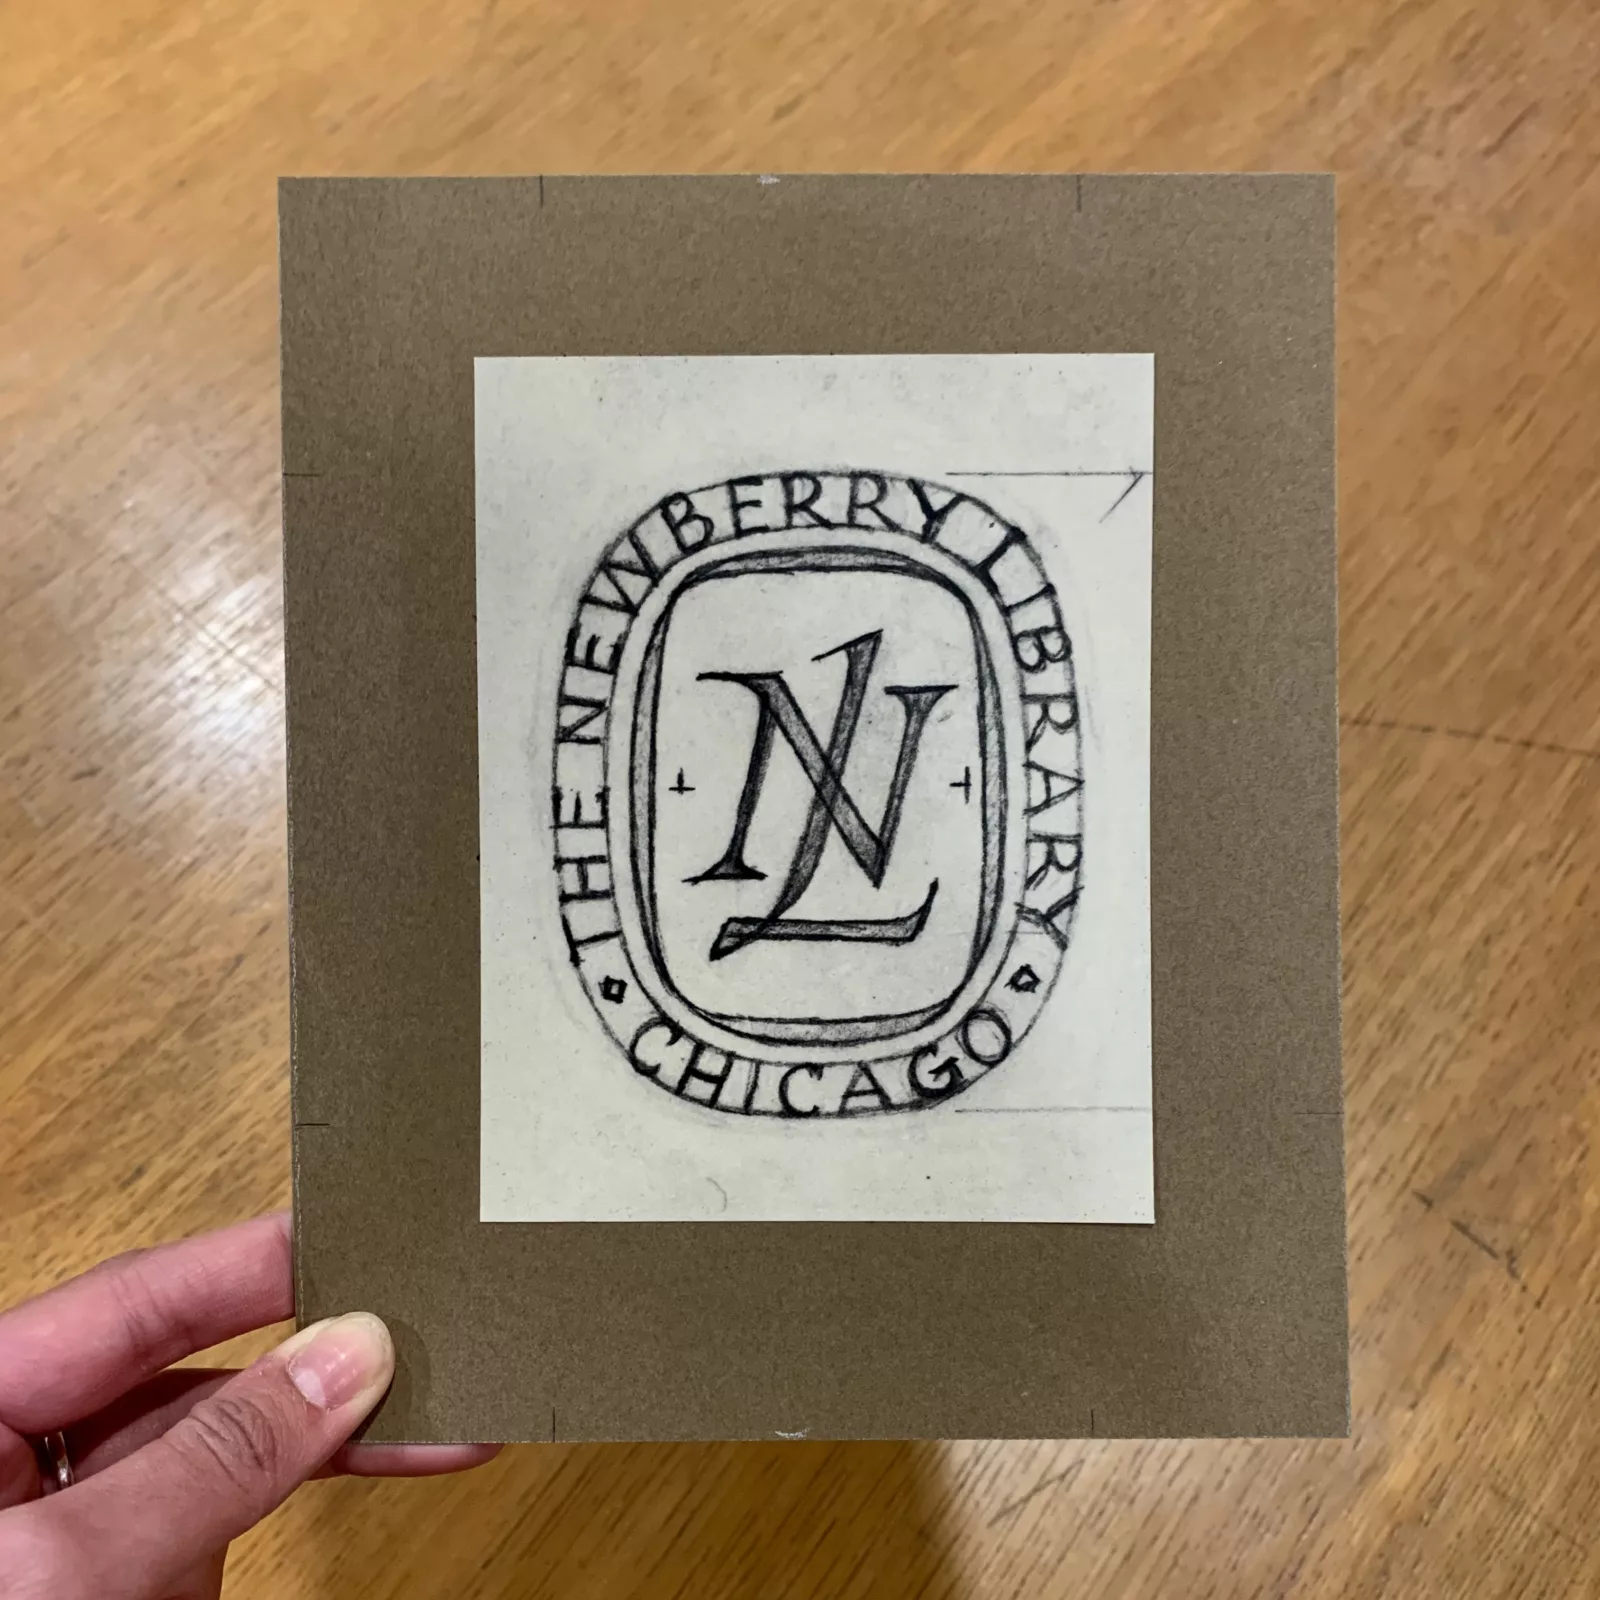 The logo has "NL" in the middle. "The Newberry Library, Chicago" is written around the perimeter.